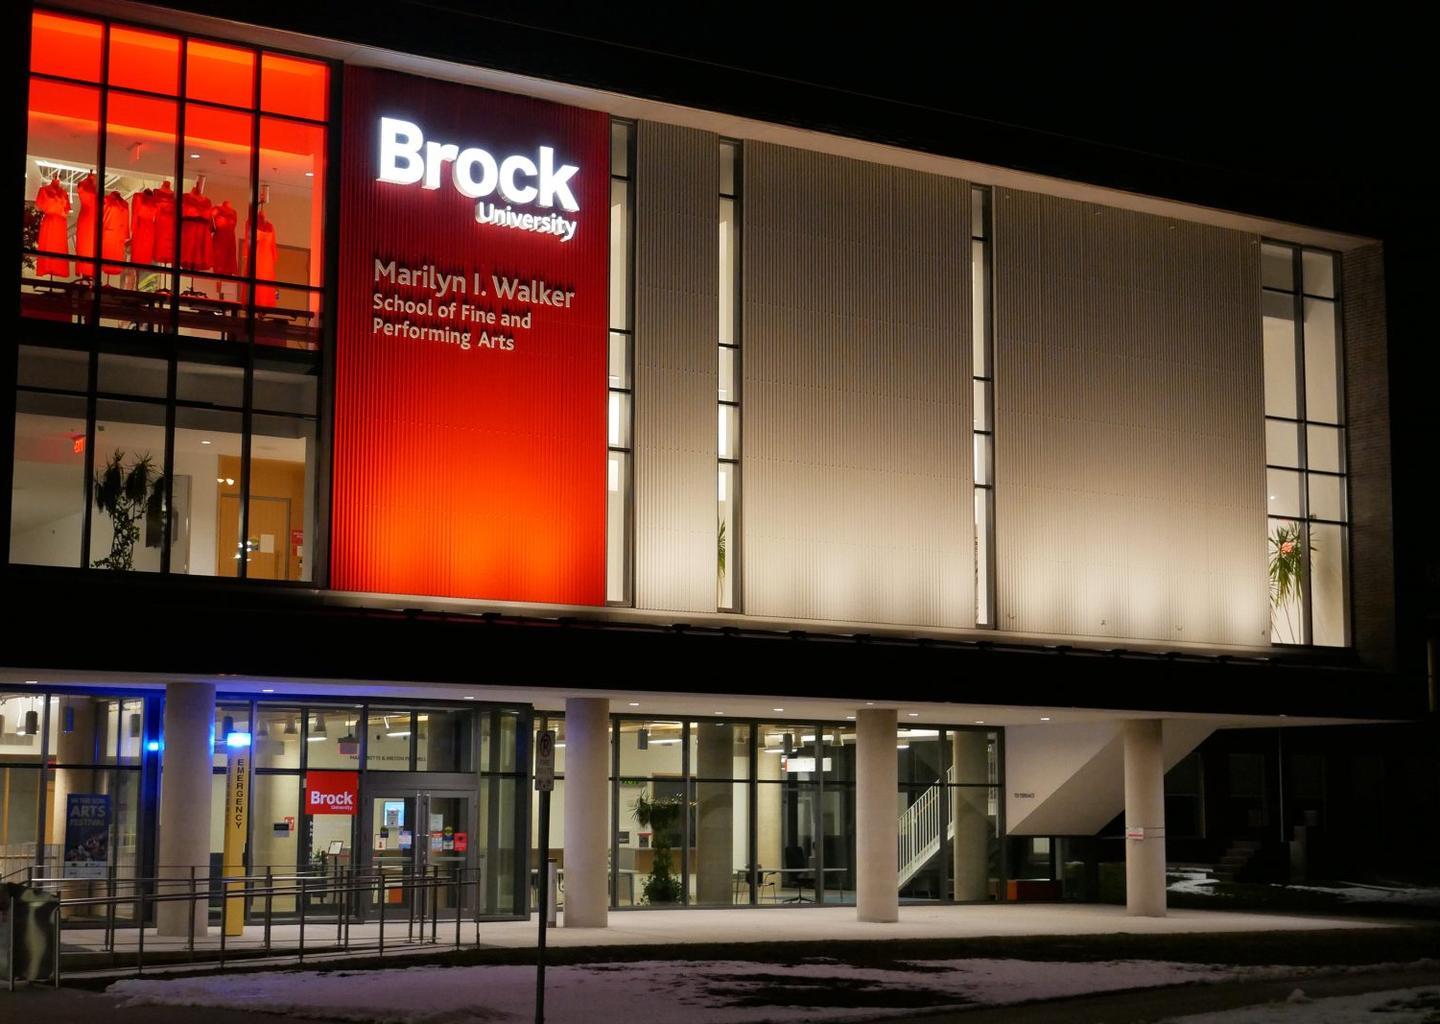 Brock University Fees, Reviews, Rankings, Courses & Contact info